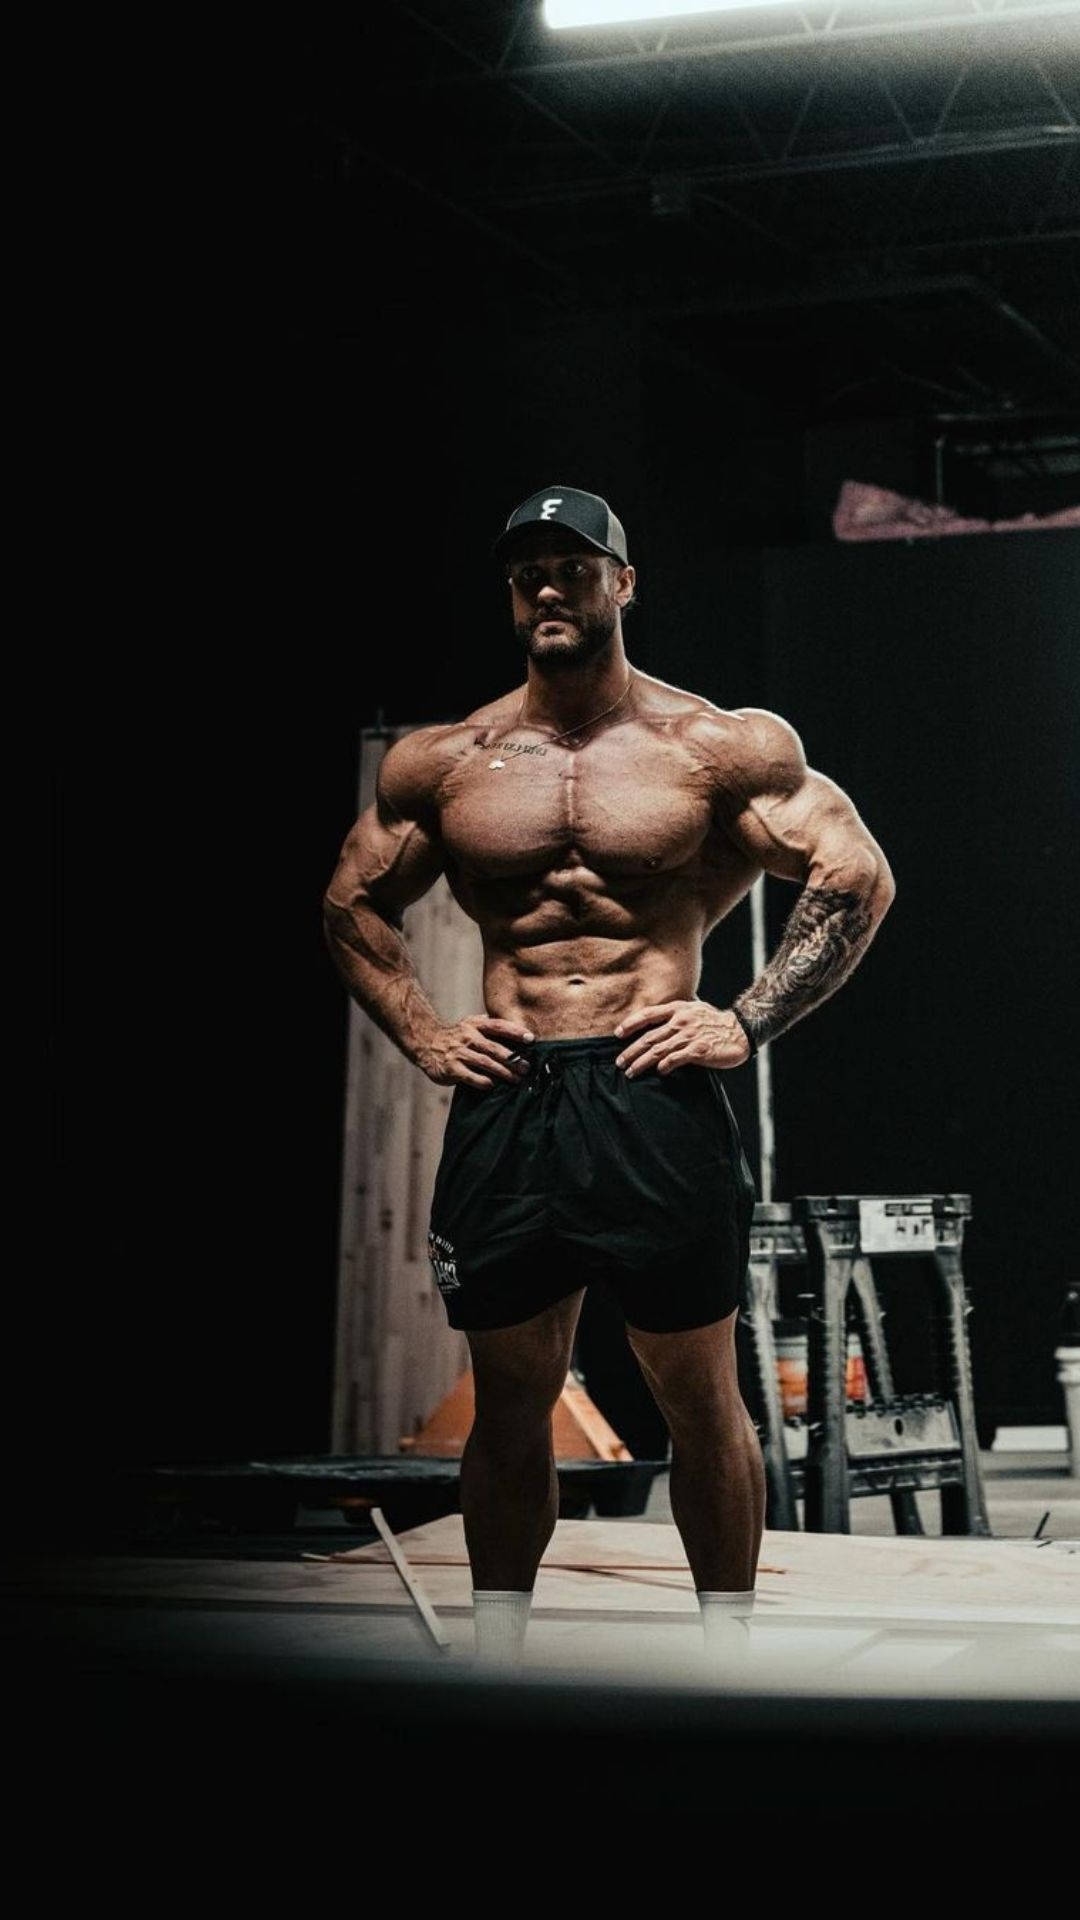 Chris Bumstead With Black Shorts Wallpaper